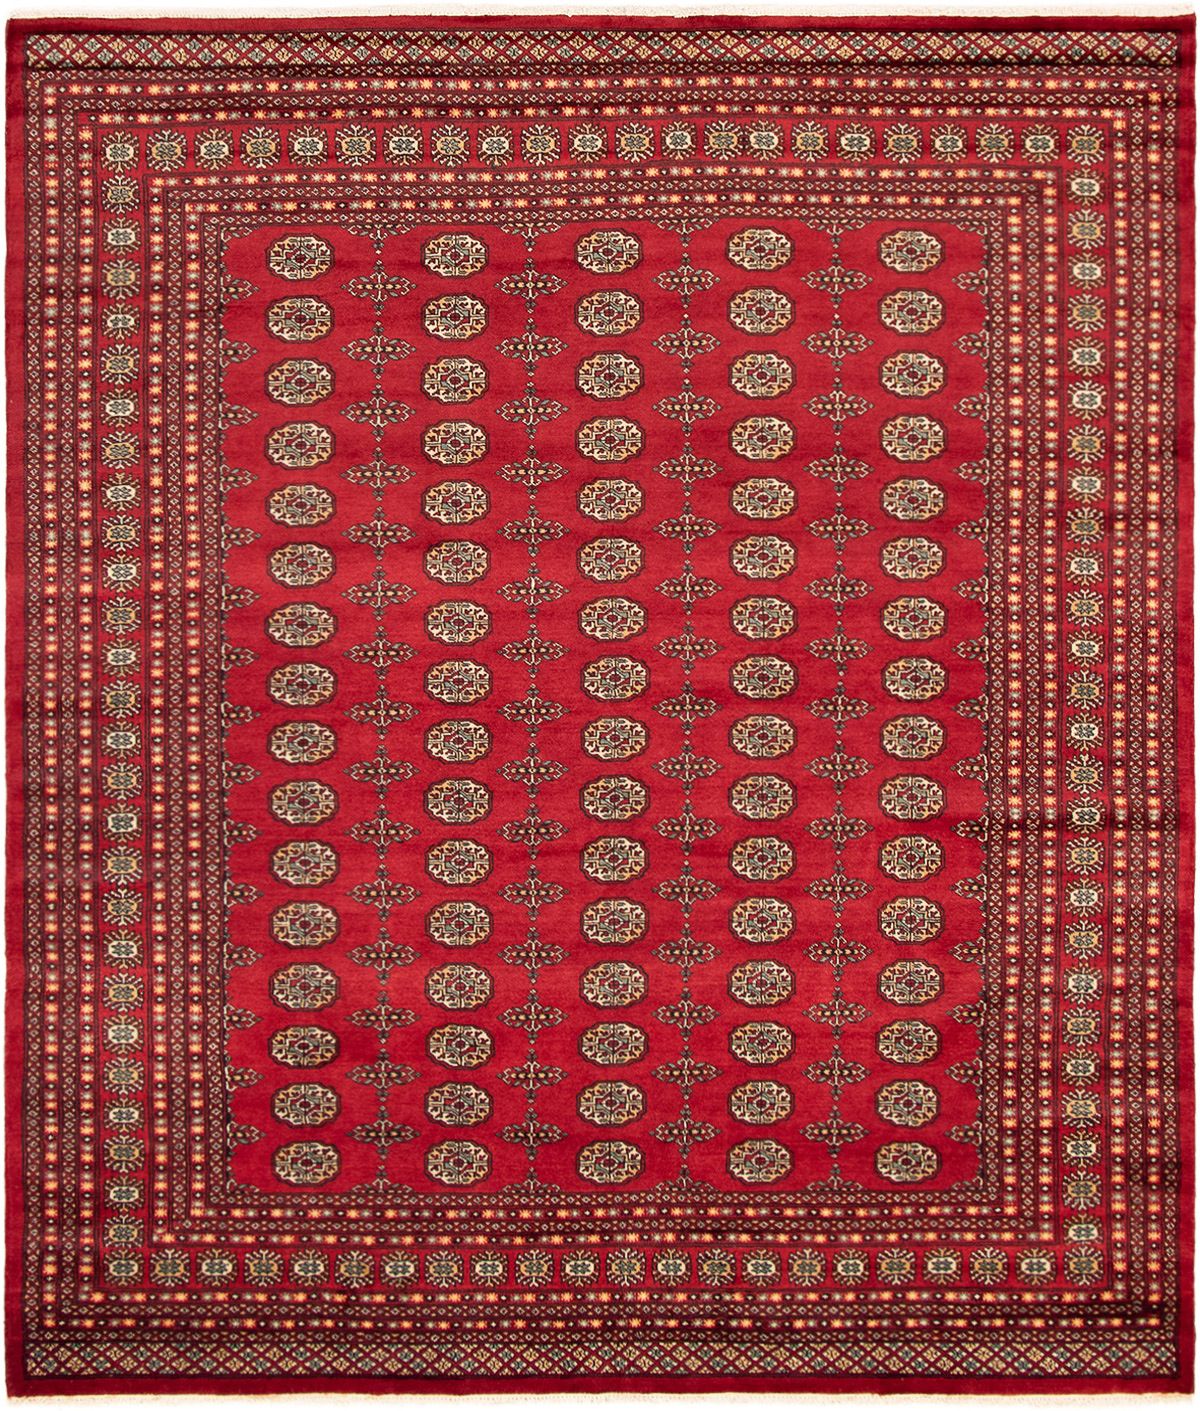 Hand-knotted Finest Peshawar Bokhara Red Wool Rug 9'3" x 12'3" Size: 9'3" x 12'3"  